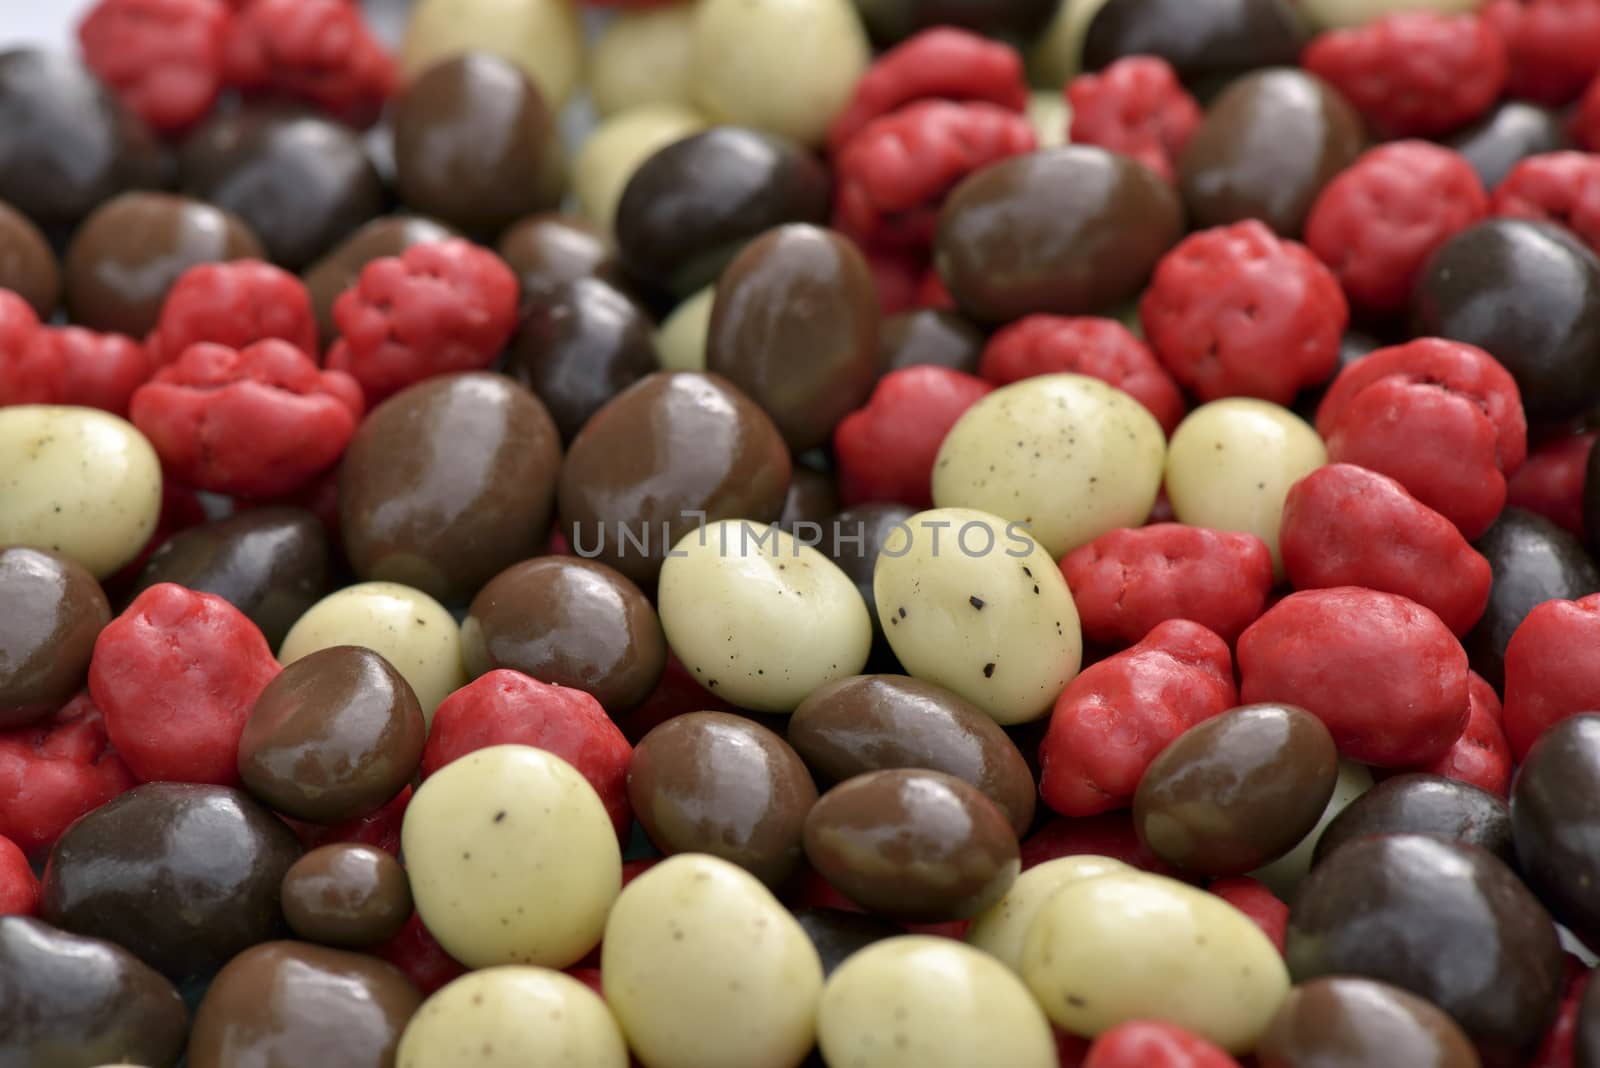 Chocolate-covered coffee beans by Hbak